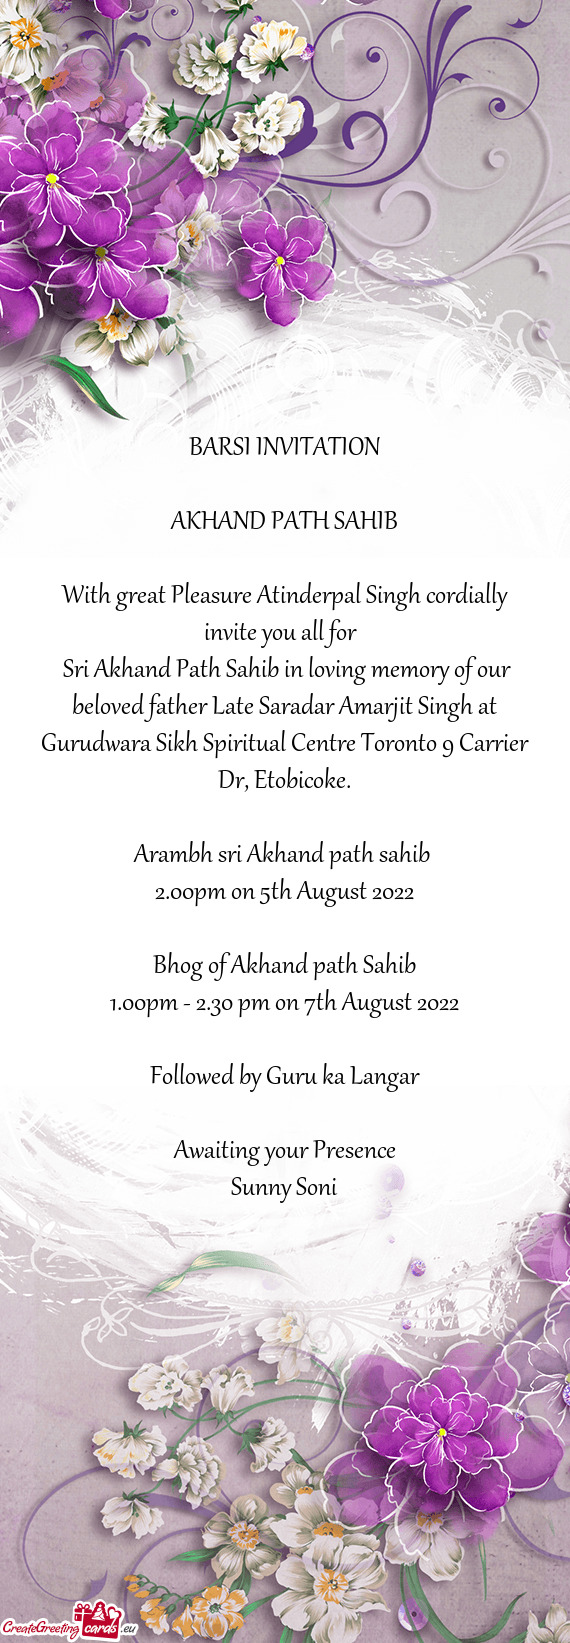 With great Pleasure Atinderpal Singh cordially invite you all for